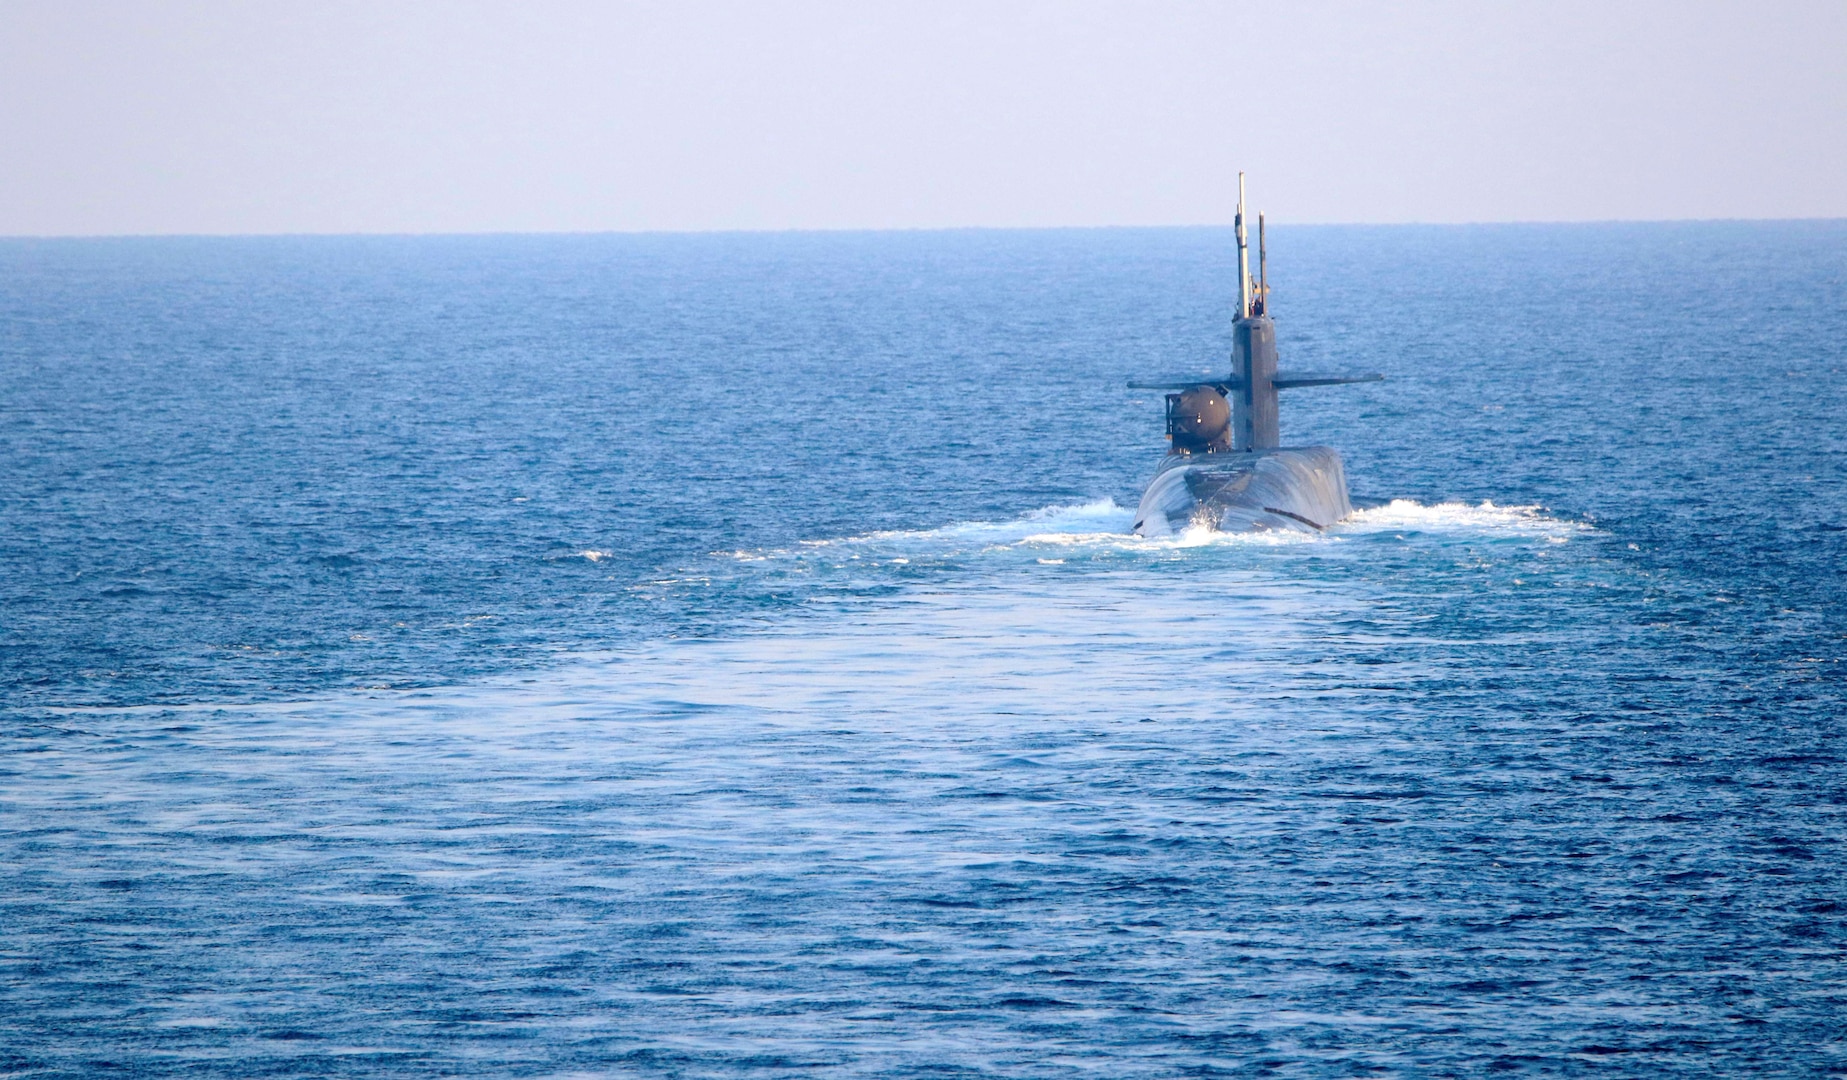 The guided-missile submarine USS Georgia (SSGN 729) transits the Strait of Hormuz, Dec. 21. Georgia is deployed to the U.S. 5th Fleet area of operations in support of naval operations to ensure maritime stability and security in the Central Region, connecting the Mediterranean and Pacific through the Western Indian Ocean and three critical chokepoints to the free flow of global commerce.